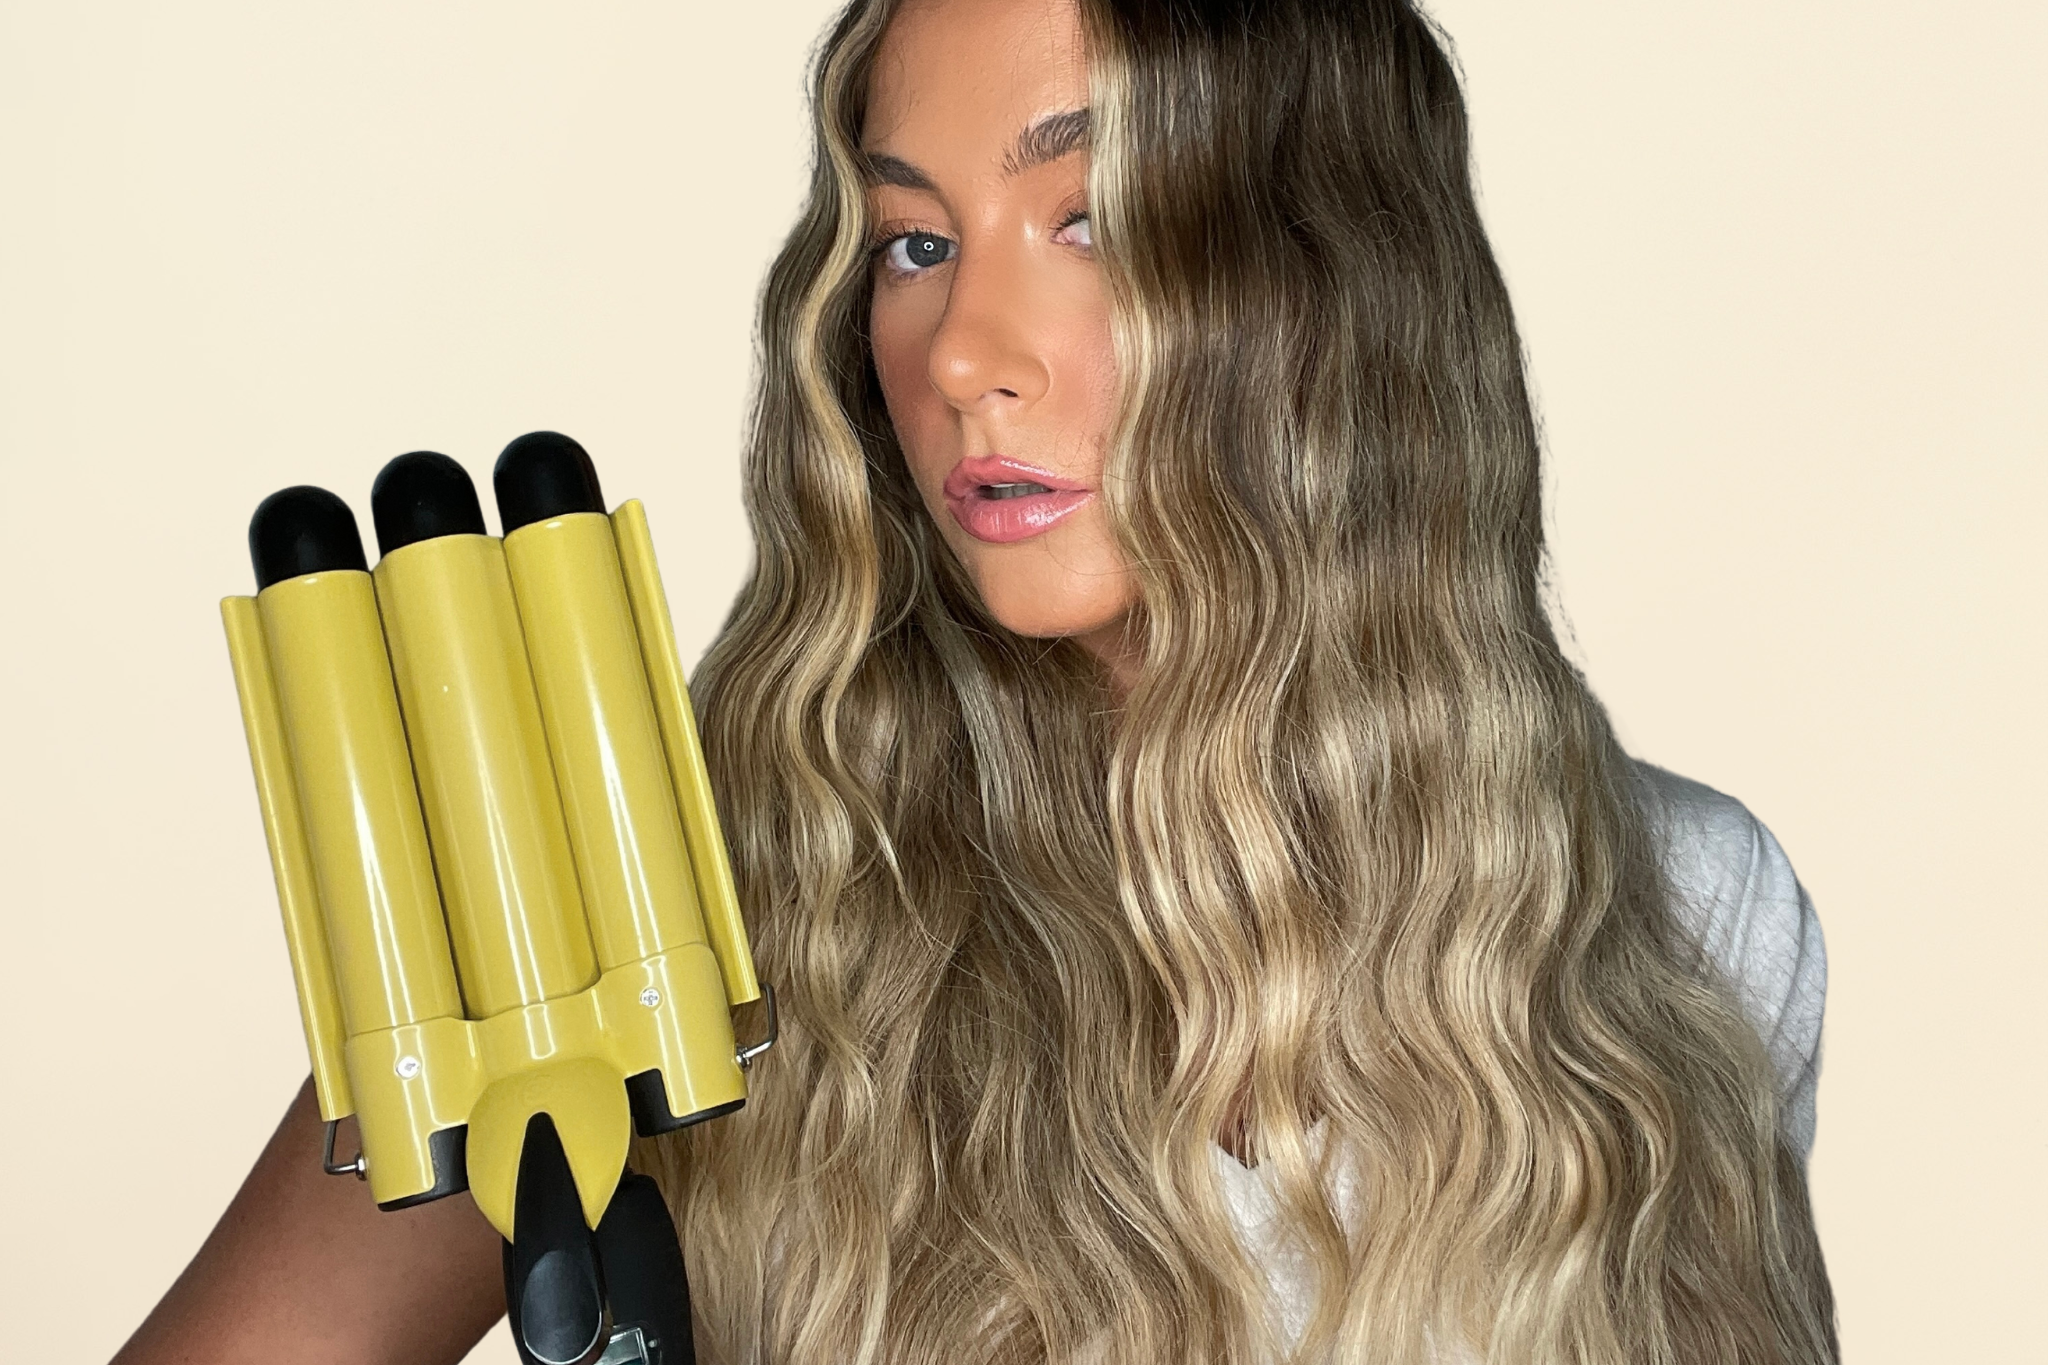 How to Use Mermaid Hair Waver: Step-by-step Guide & Tips